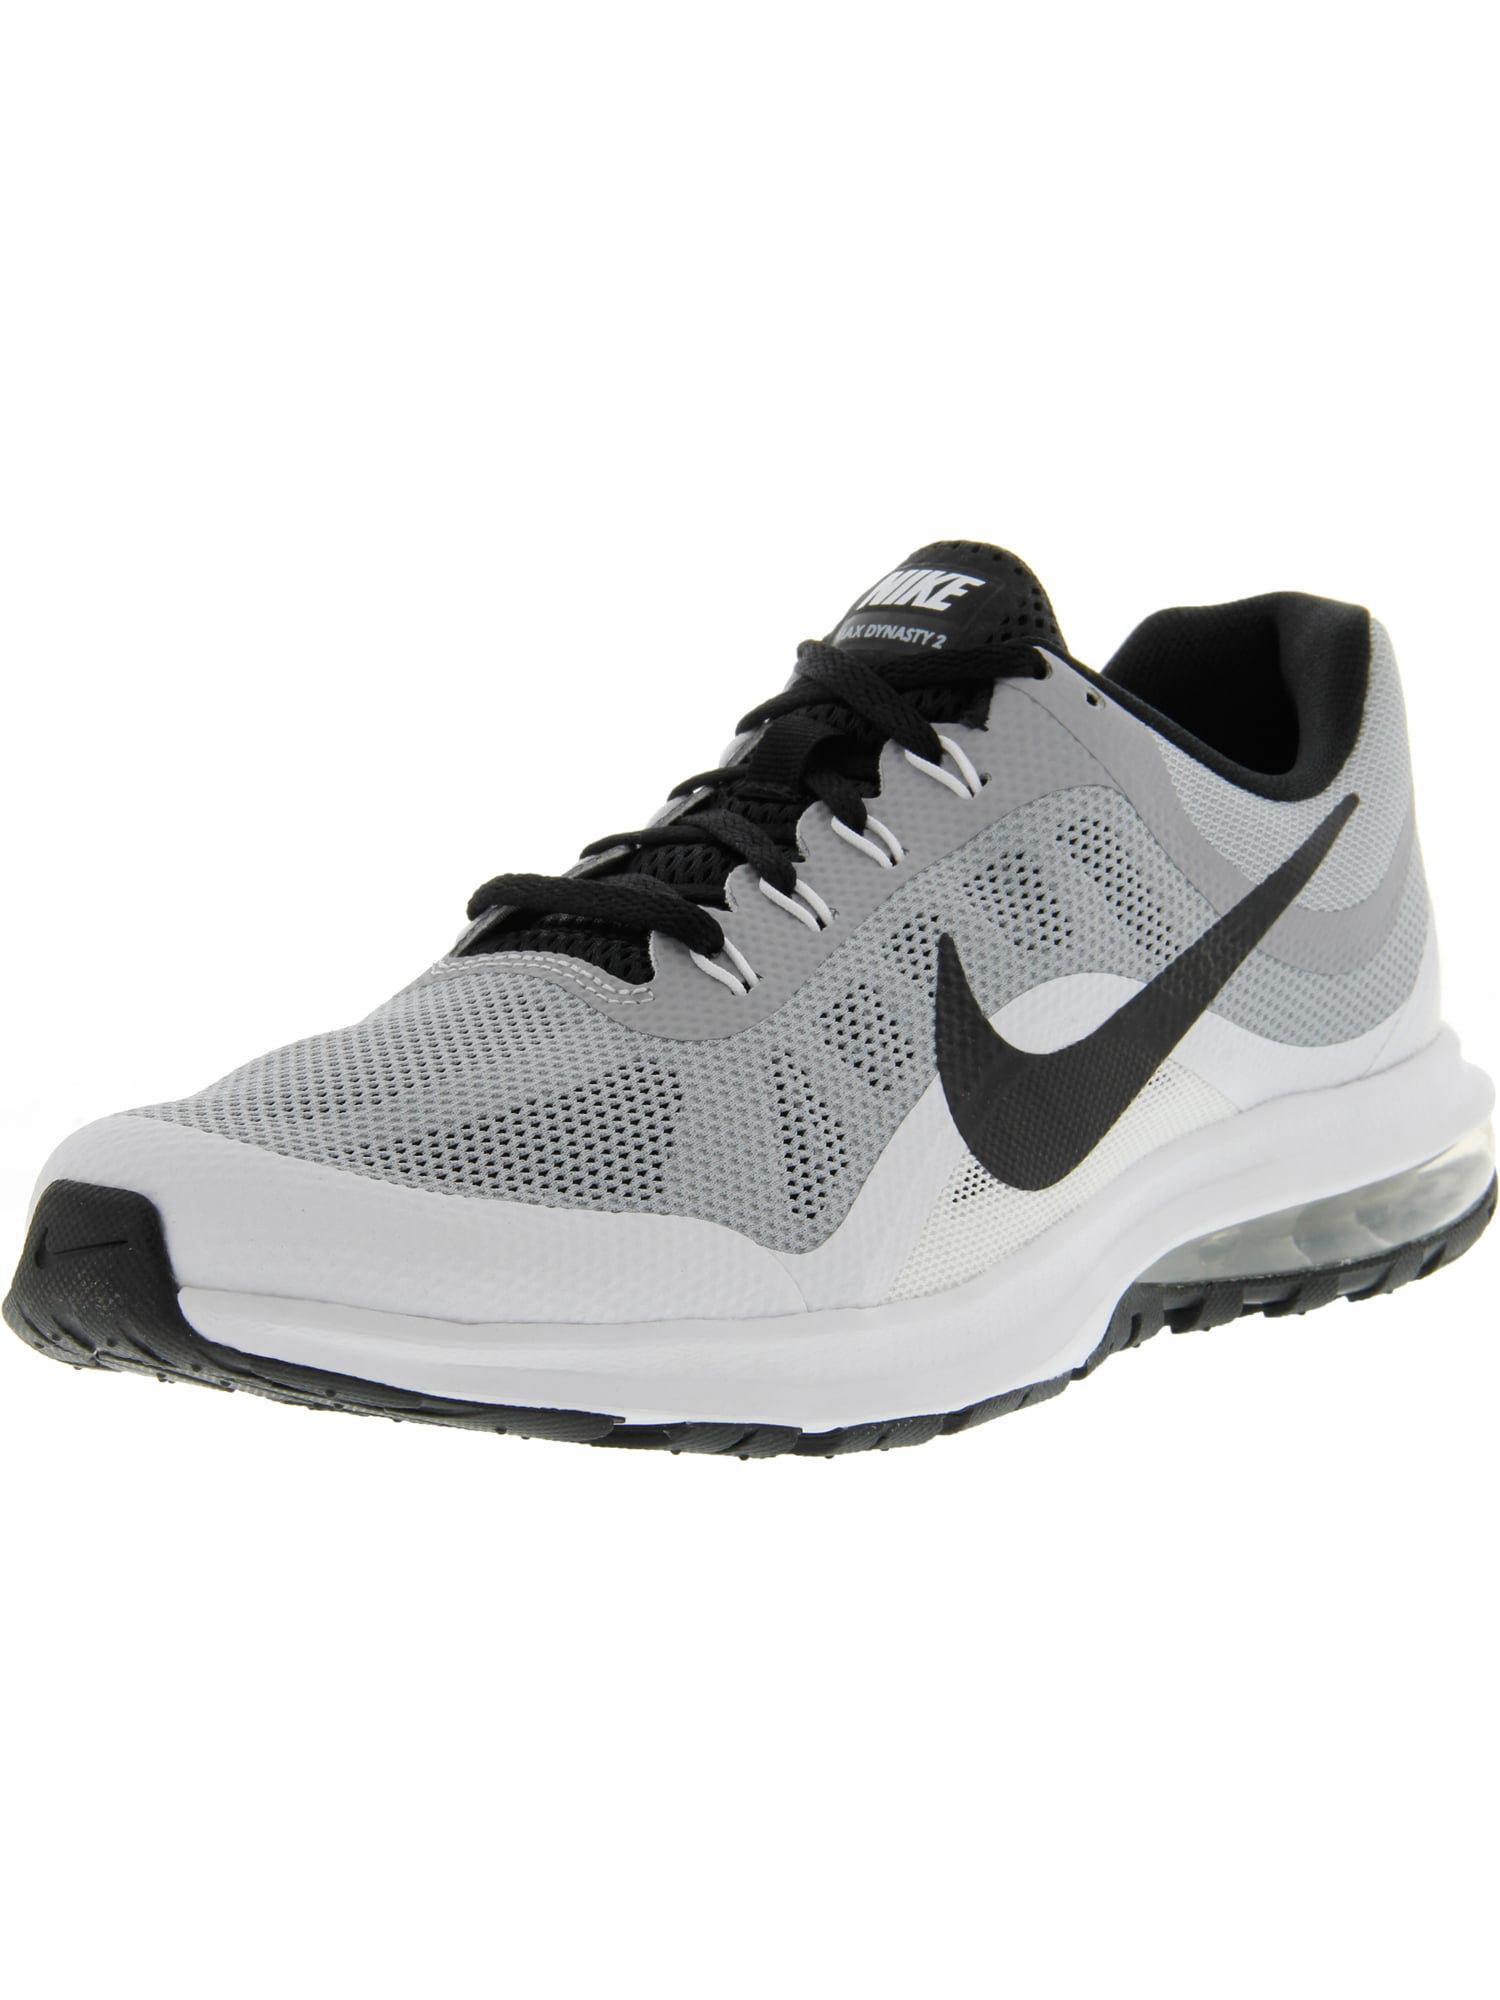 Nike Men's Air Max Dynasty 2 Wolf Grey / White - Black Ankle-High ...